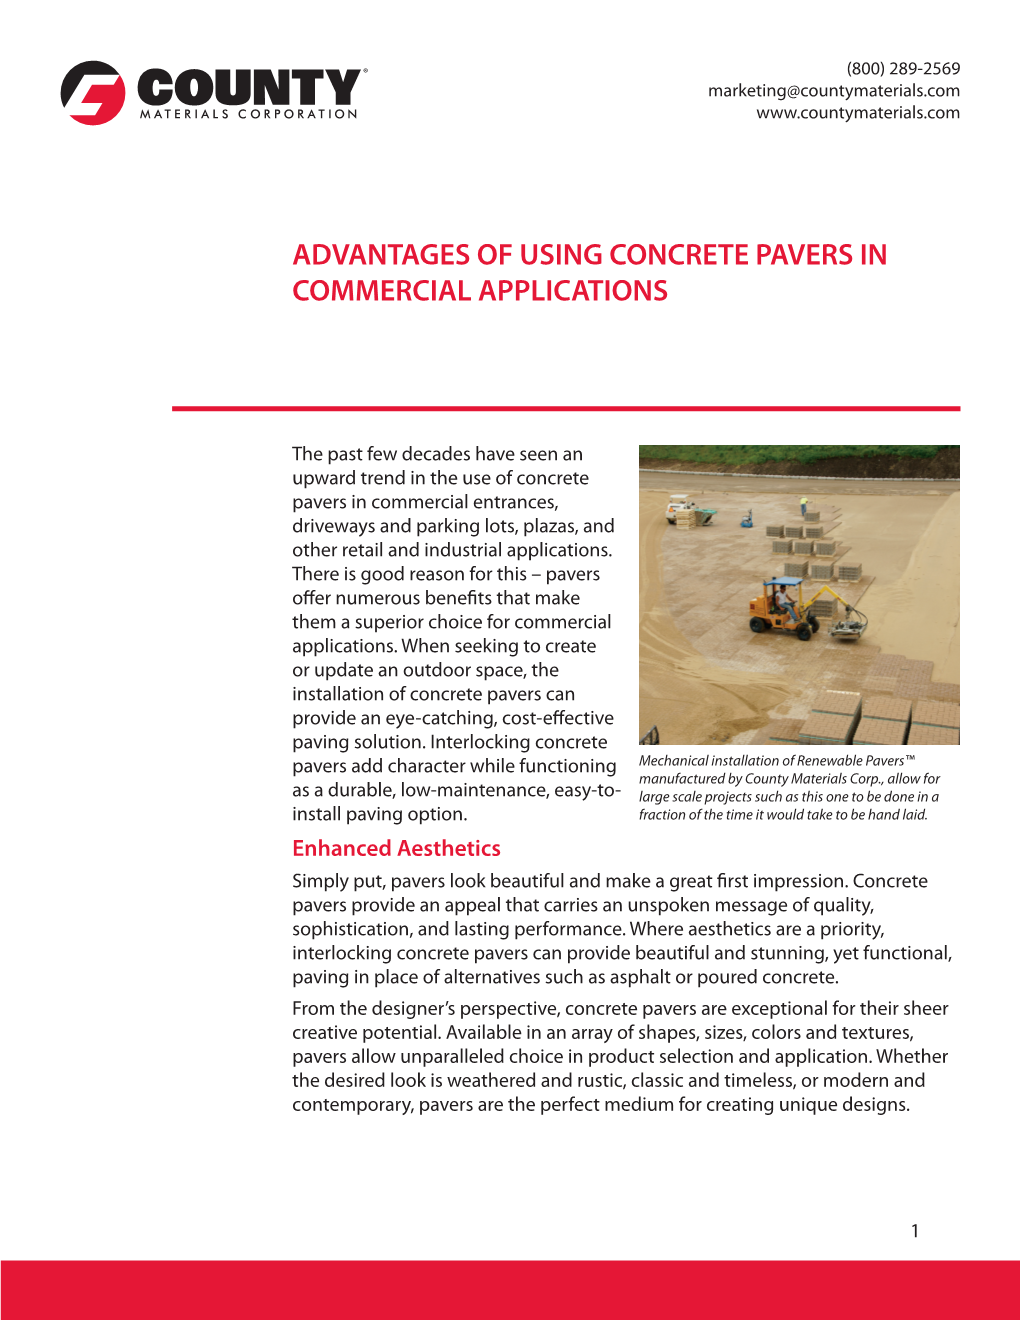 Advantages of Using Concrete Pavers in Commercial Applications